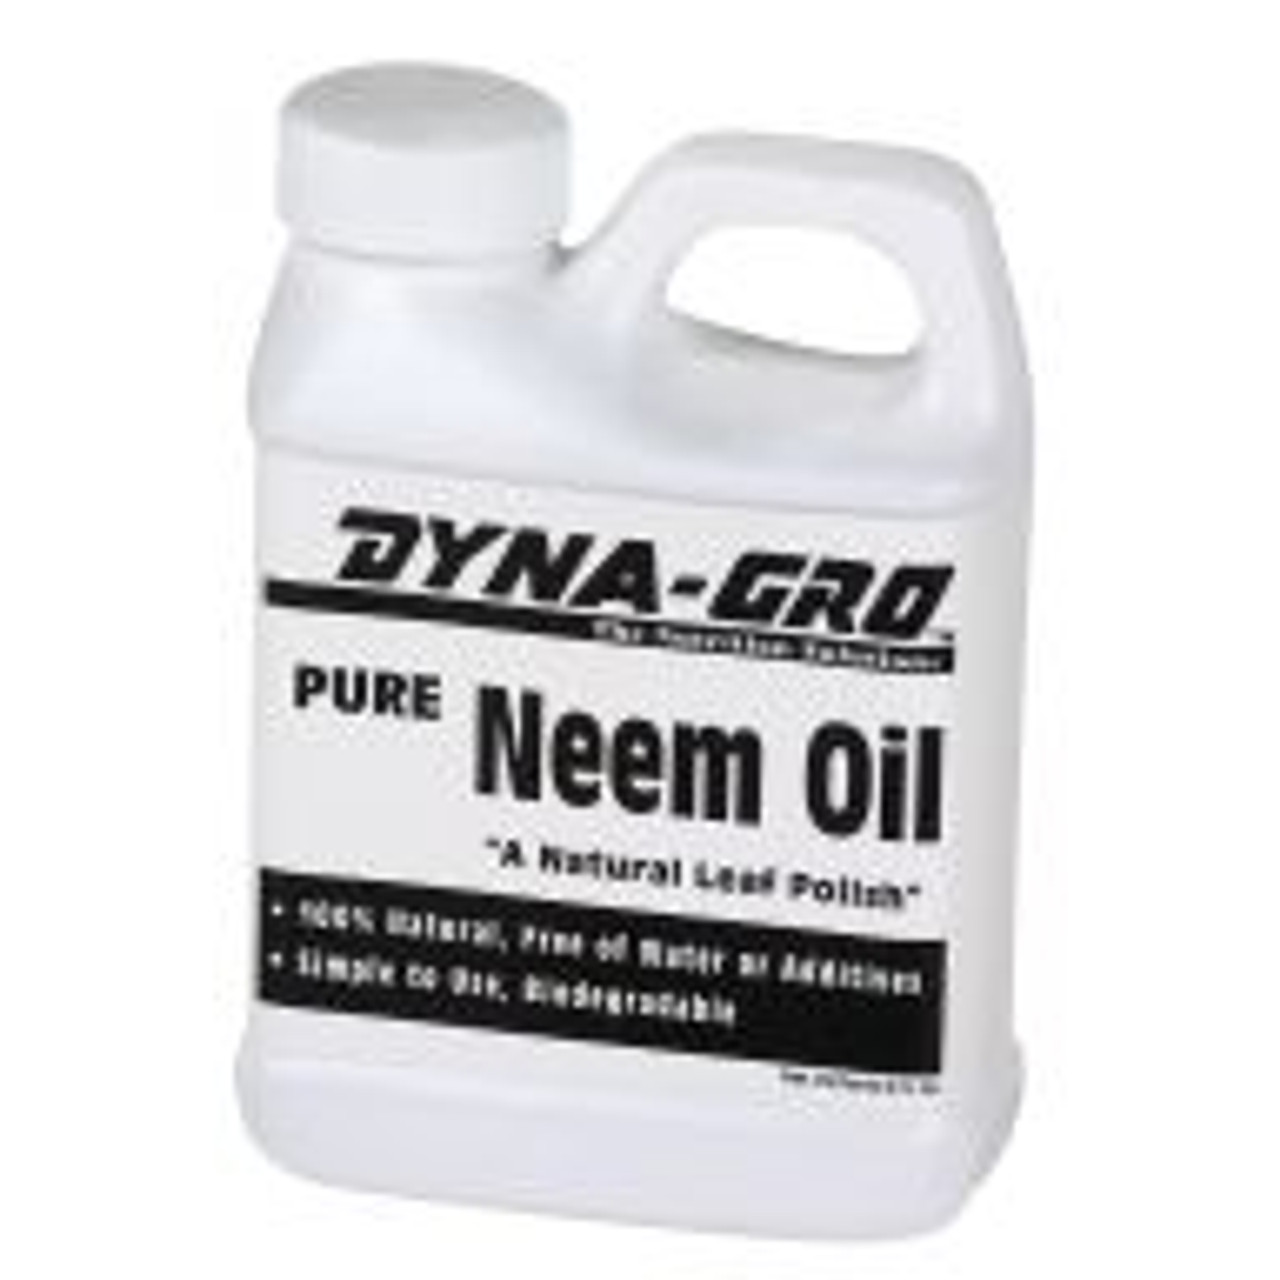 Pure Neem Oil is an organic leaf polish to be used to produce clean, shiny leaves on any plant.